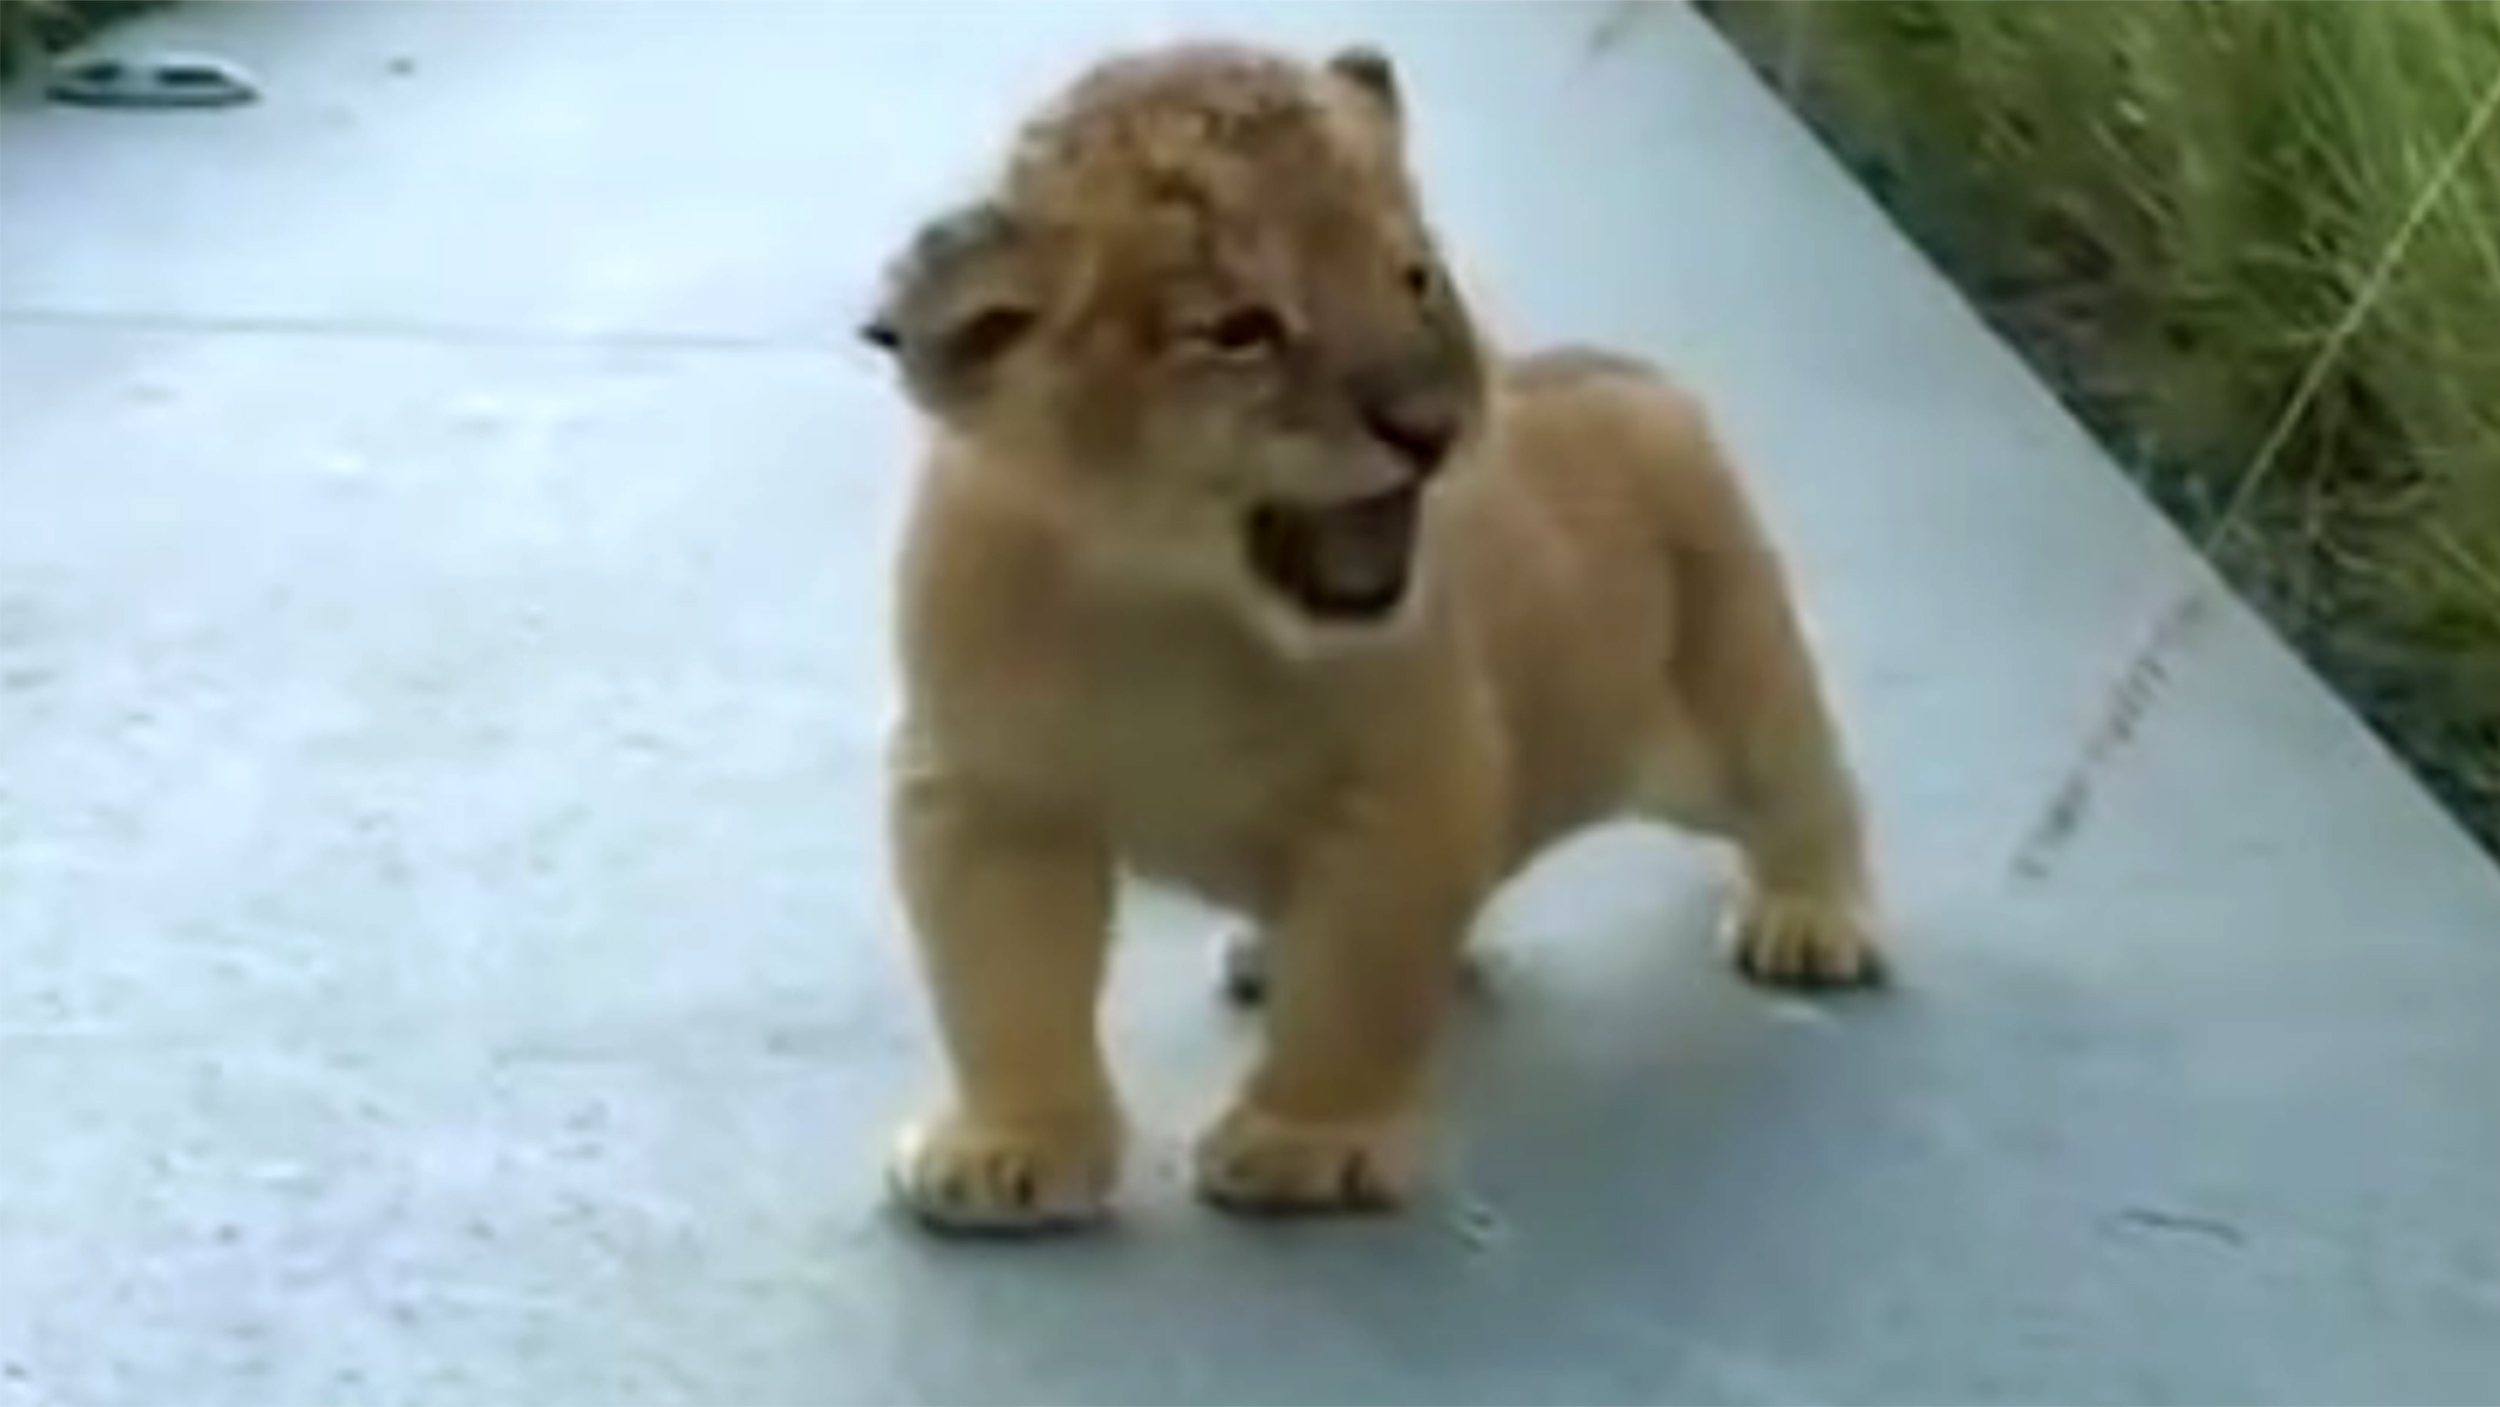 This adorable lion cub trying to roar is anything but ferocious